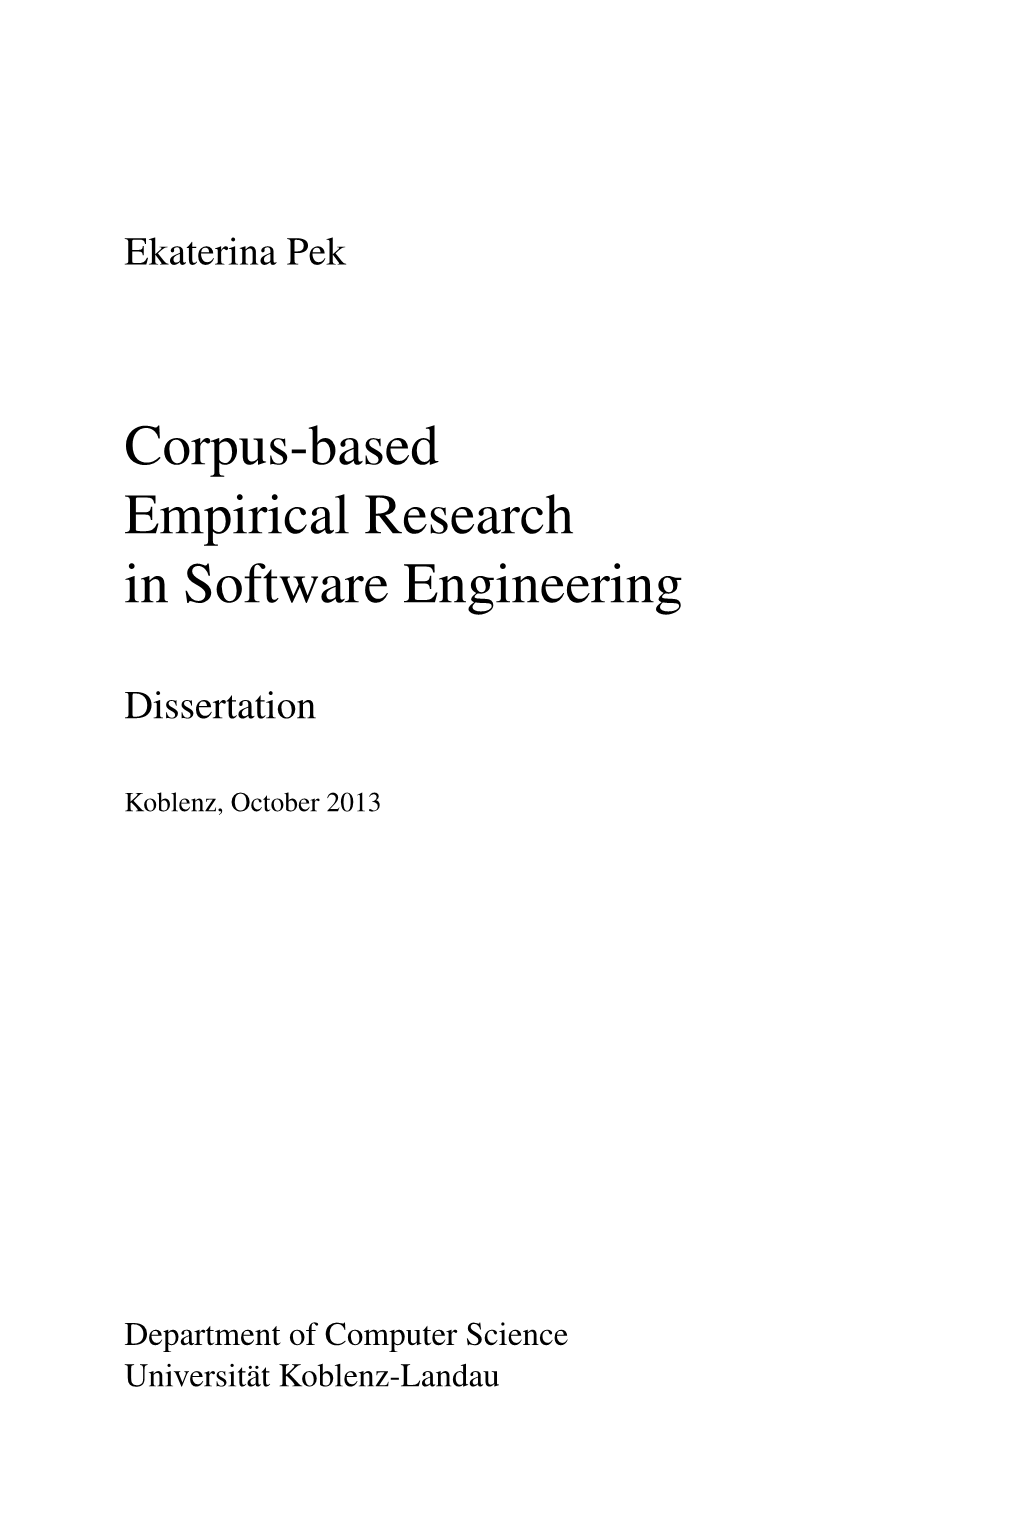 Corpus-Based Empirical Research in Software Engineering